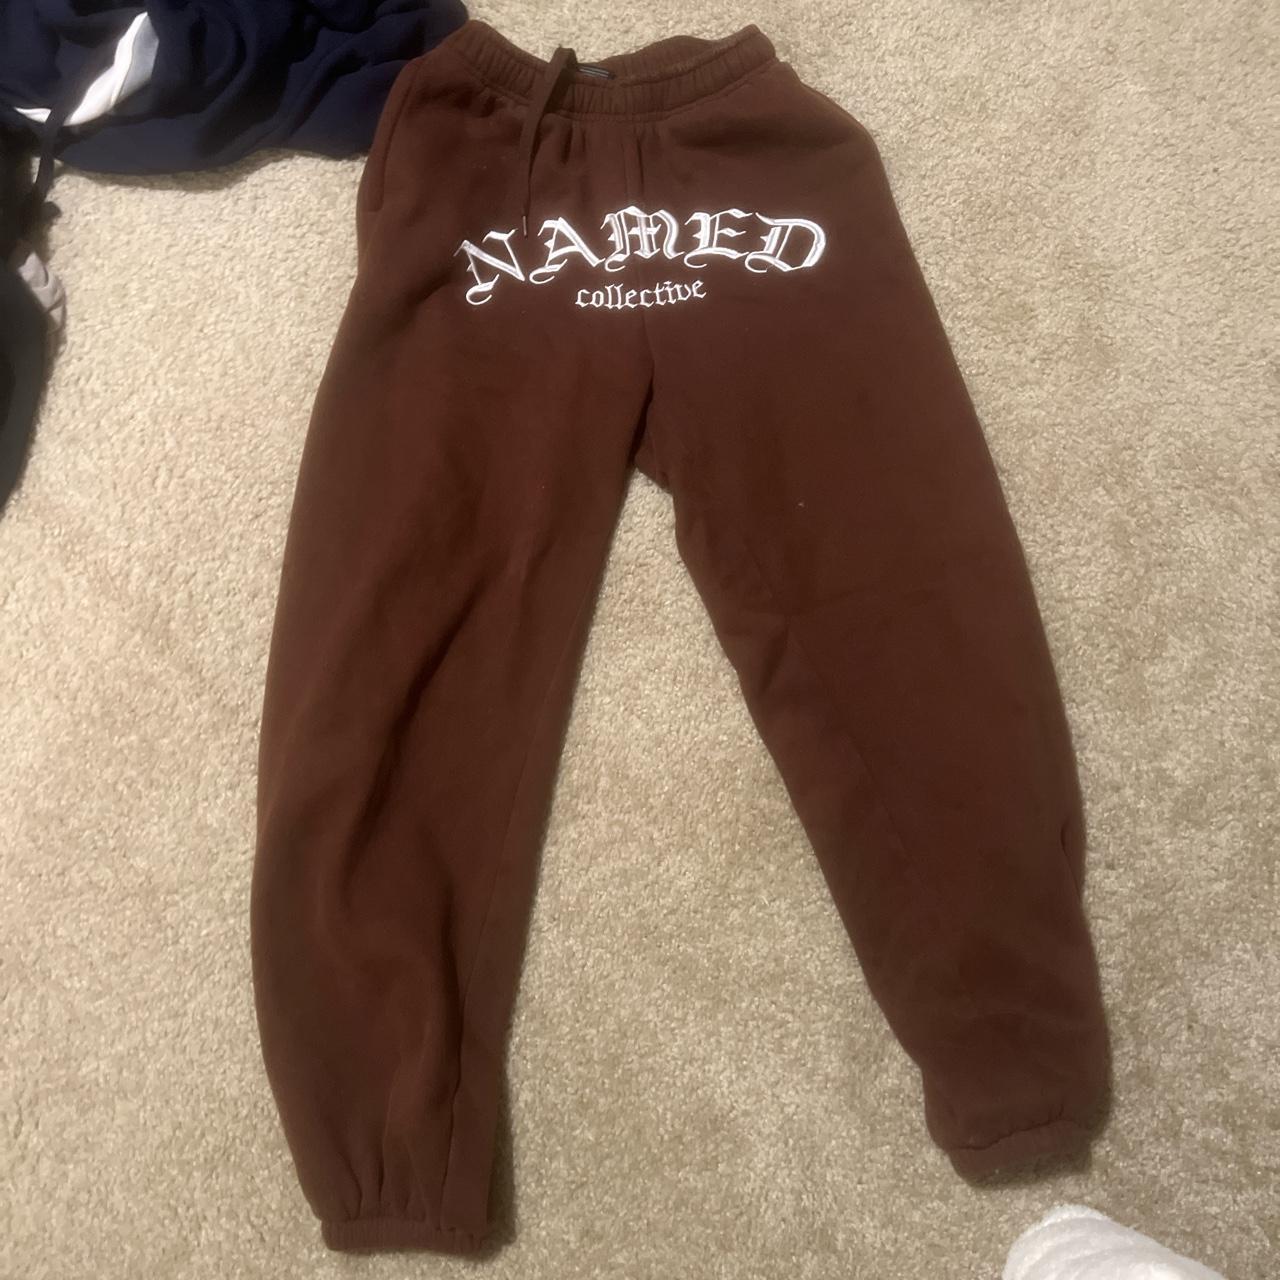 SWEATPANTS – NAMED COLLECTIVE®